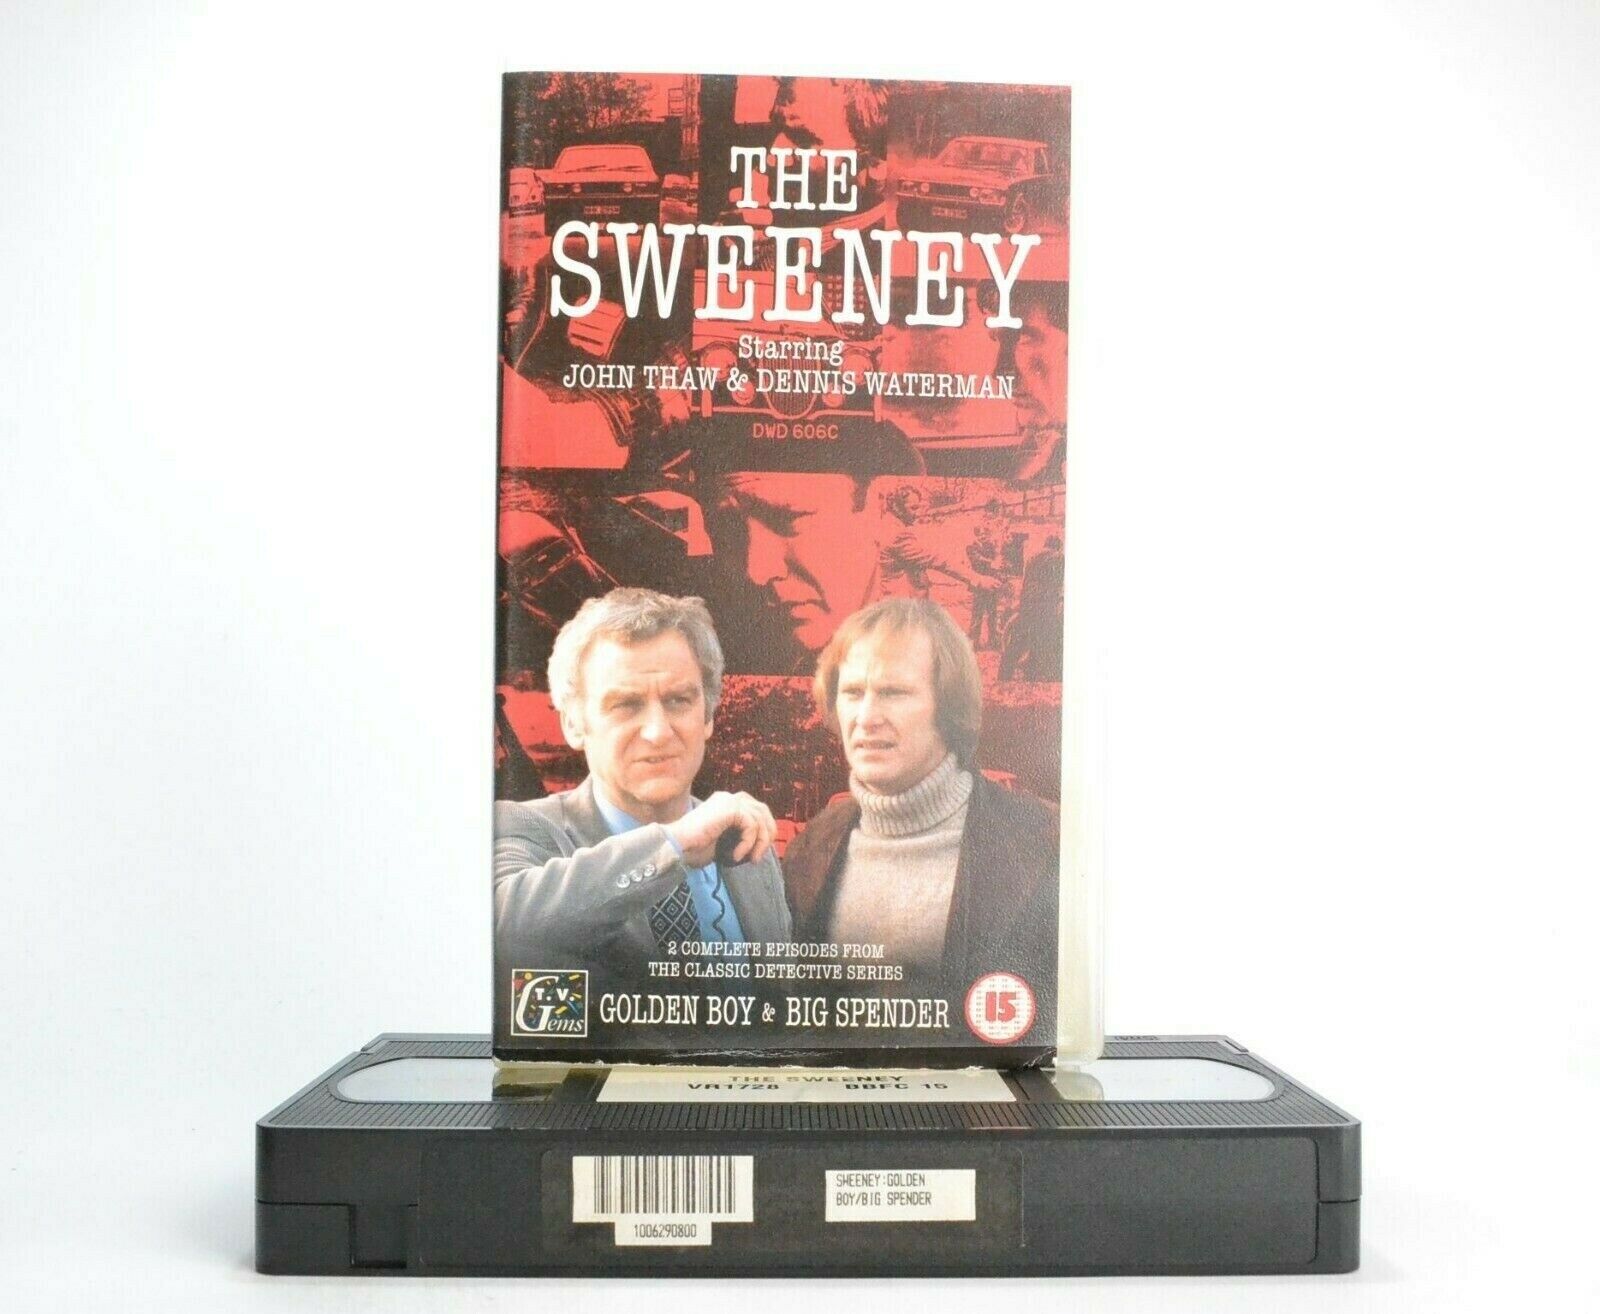 The Sweeney: Classic TV Series - Action/Crime - J.Thaw/D.Waterman - Pal VHS-